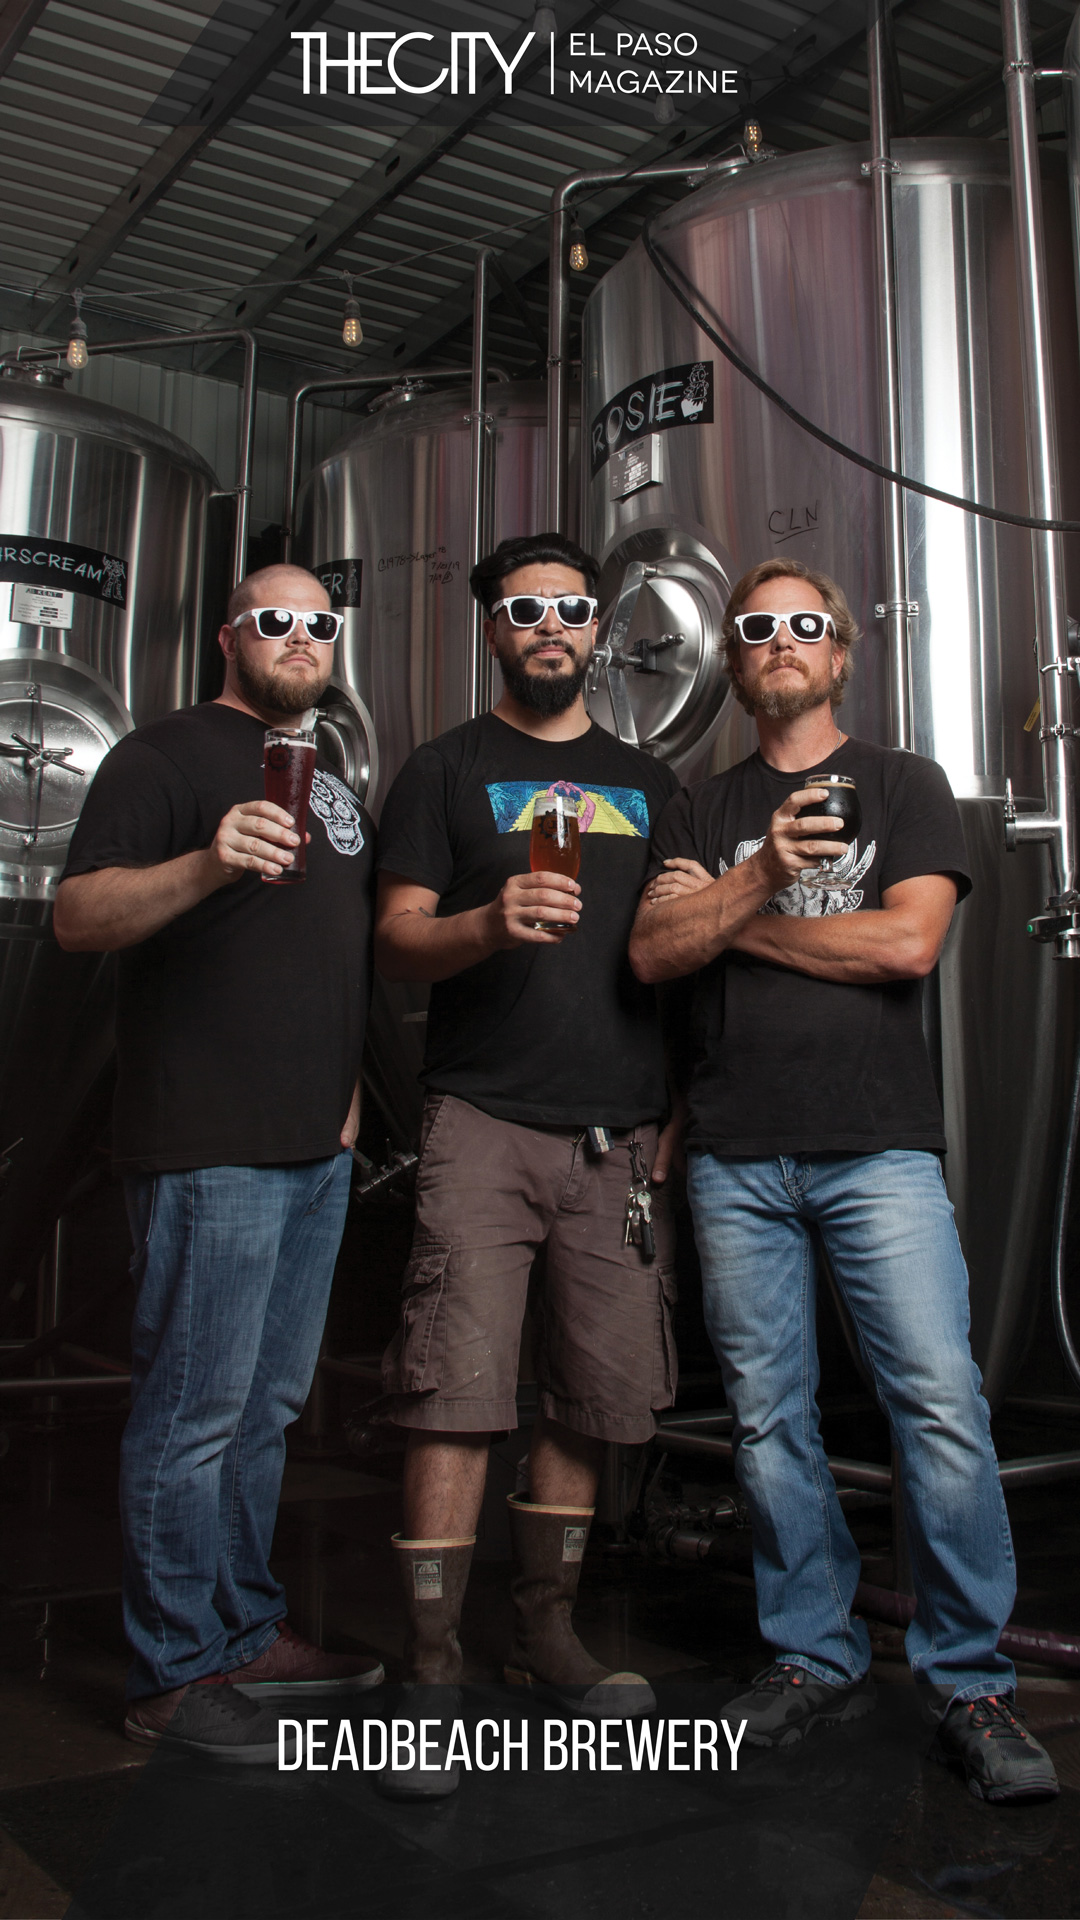 LOCALLY OWNED BUSINESS: DEADBEACH BREWERY